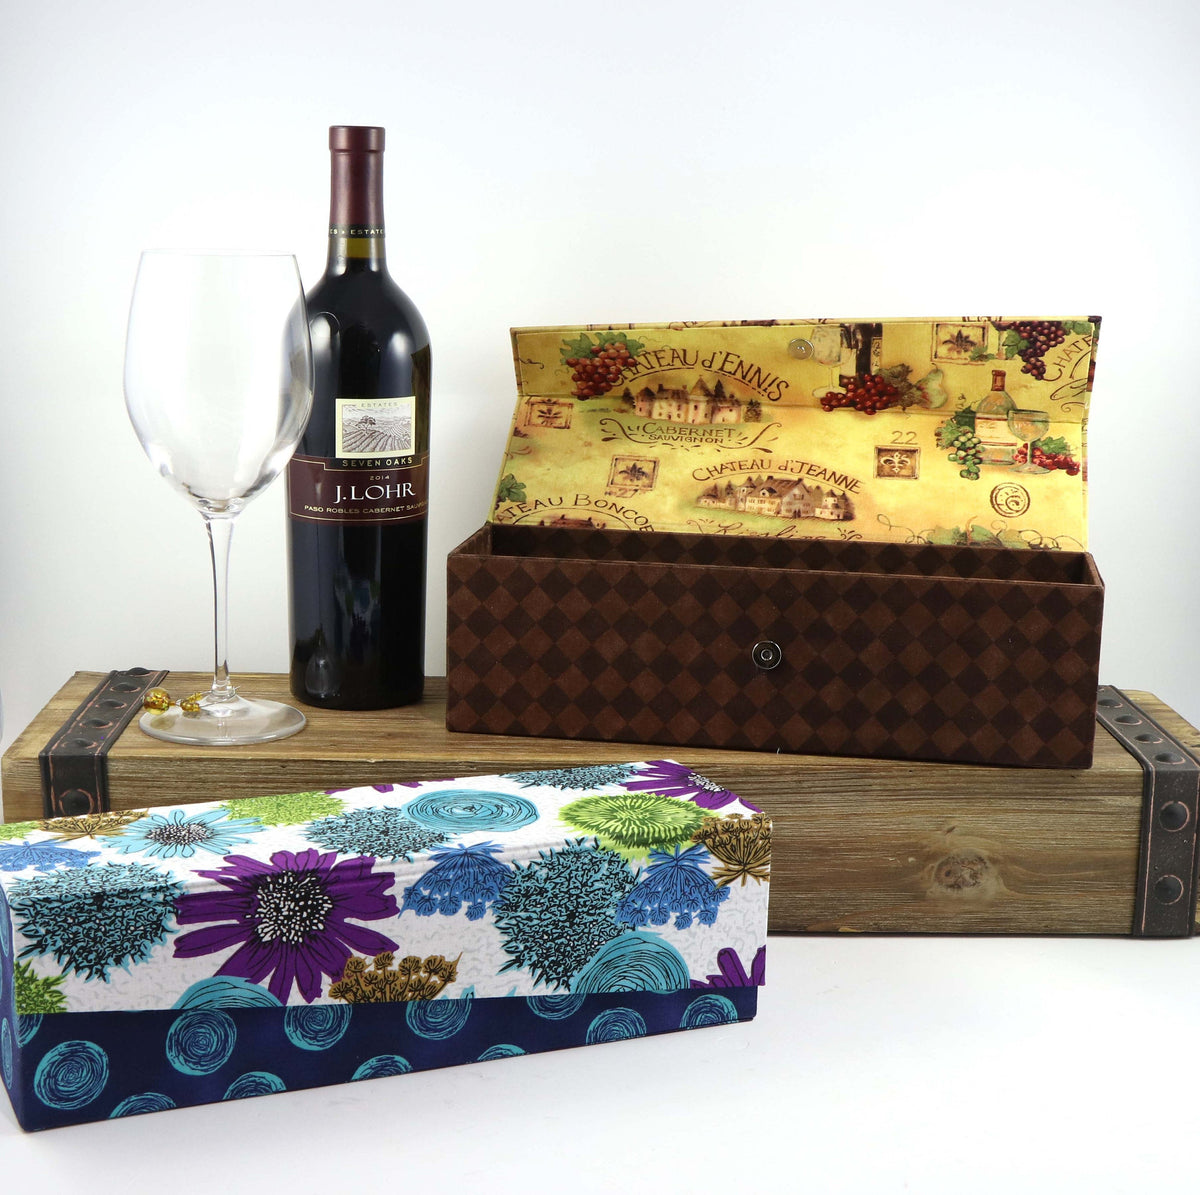 Fabric wine box DIY kit, cartonnage kit 165, online instructions included - Colorway Arts